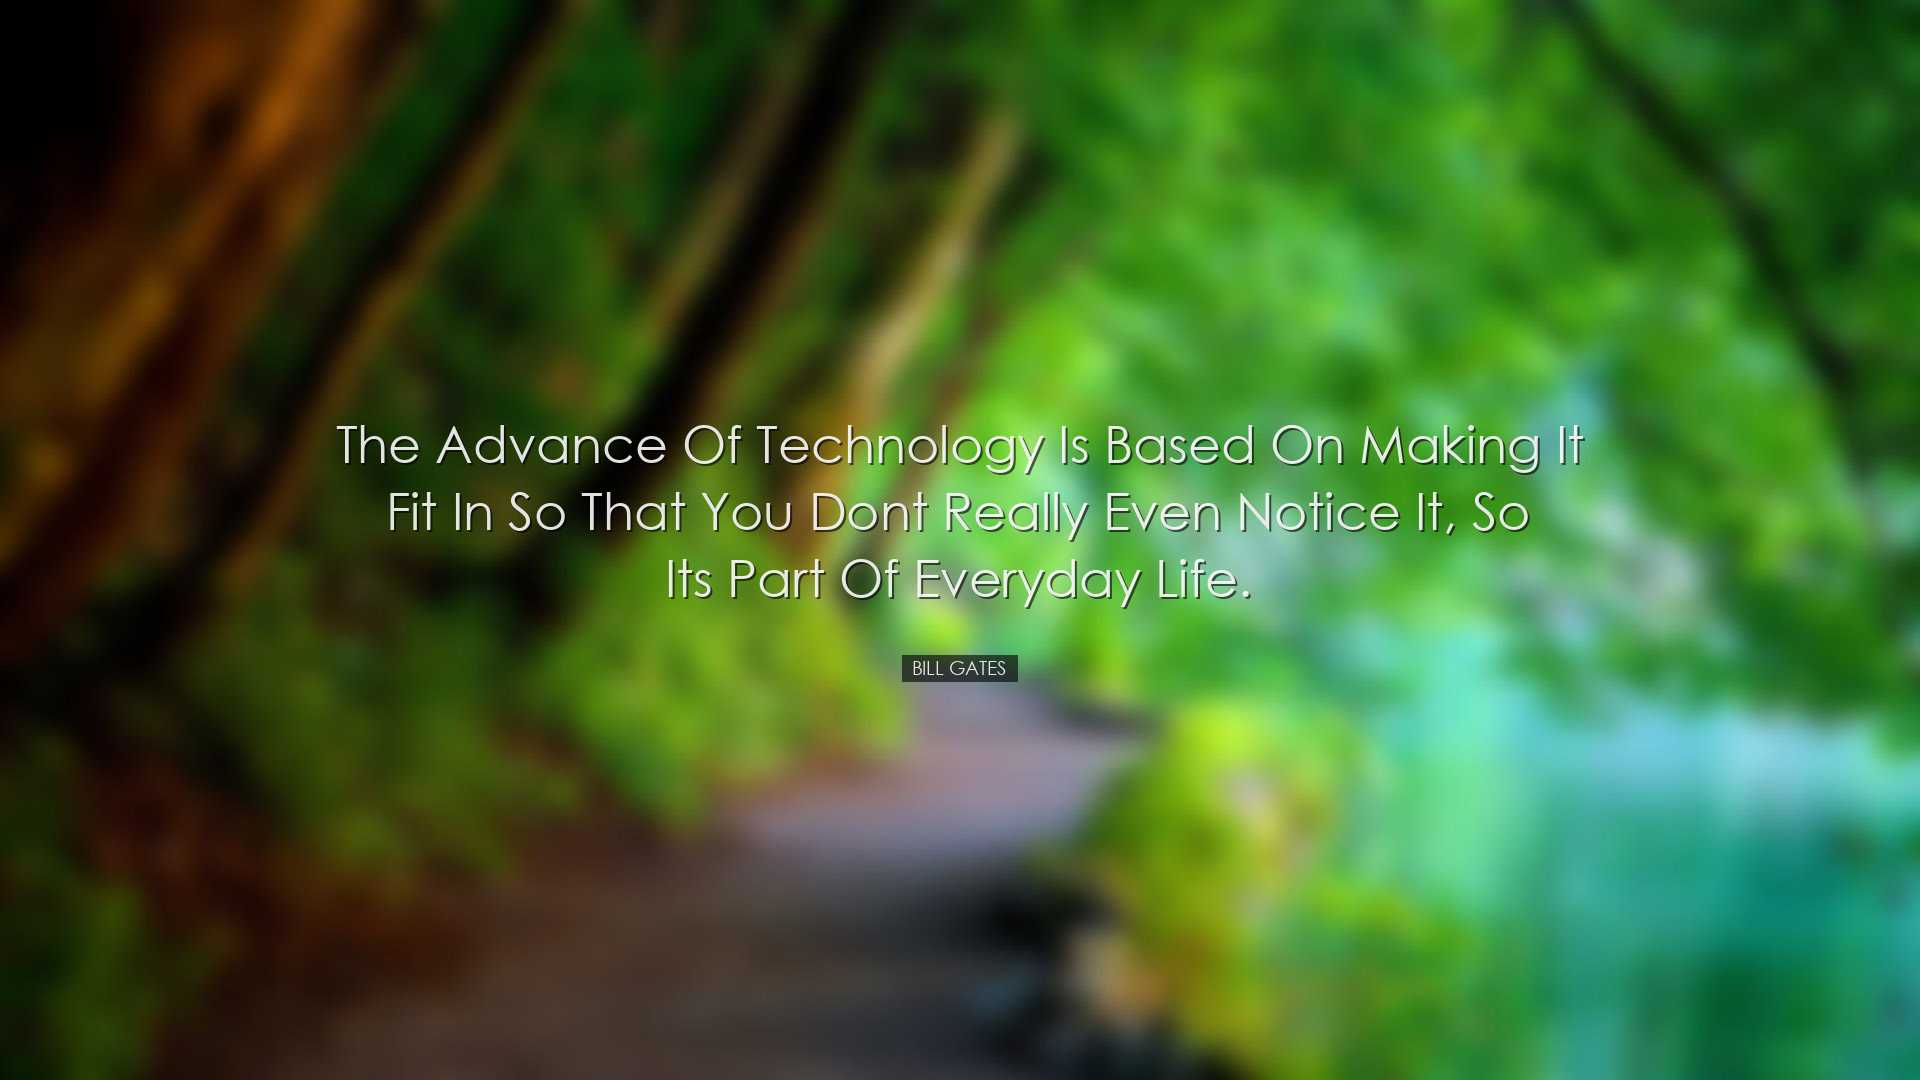 The advance of technology is based on making it fit in so that you